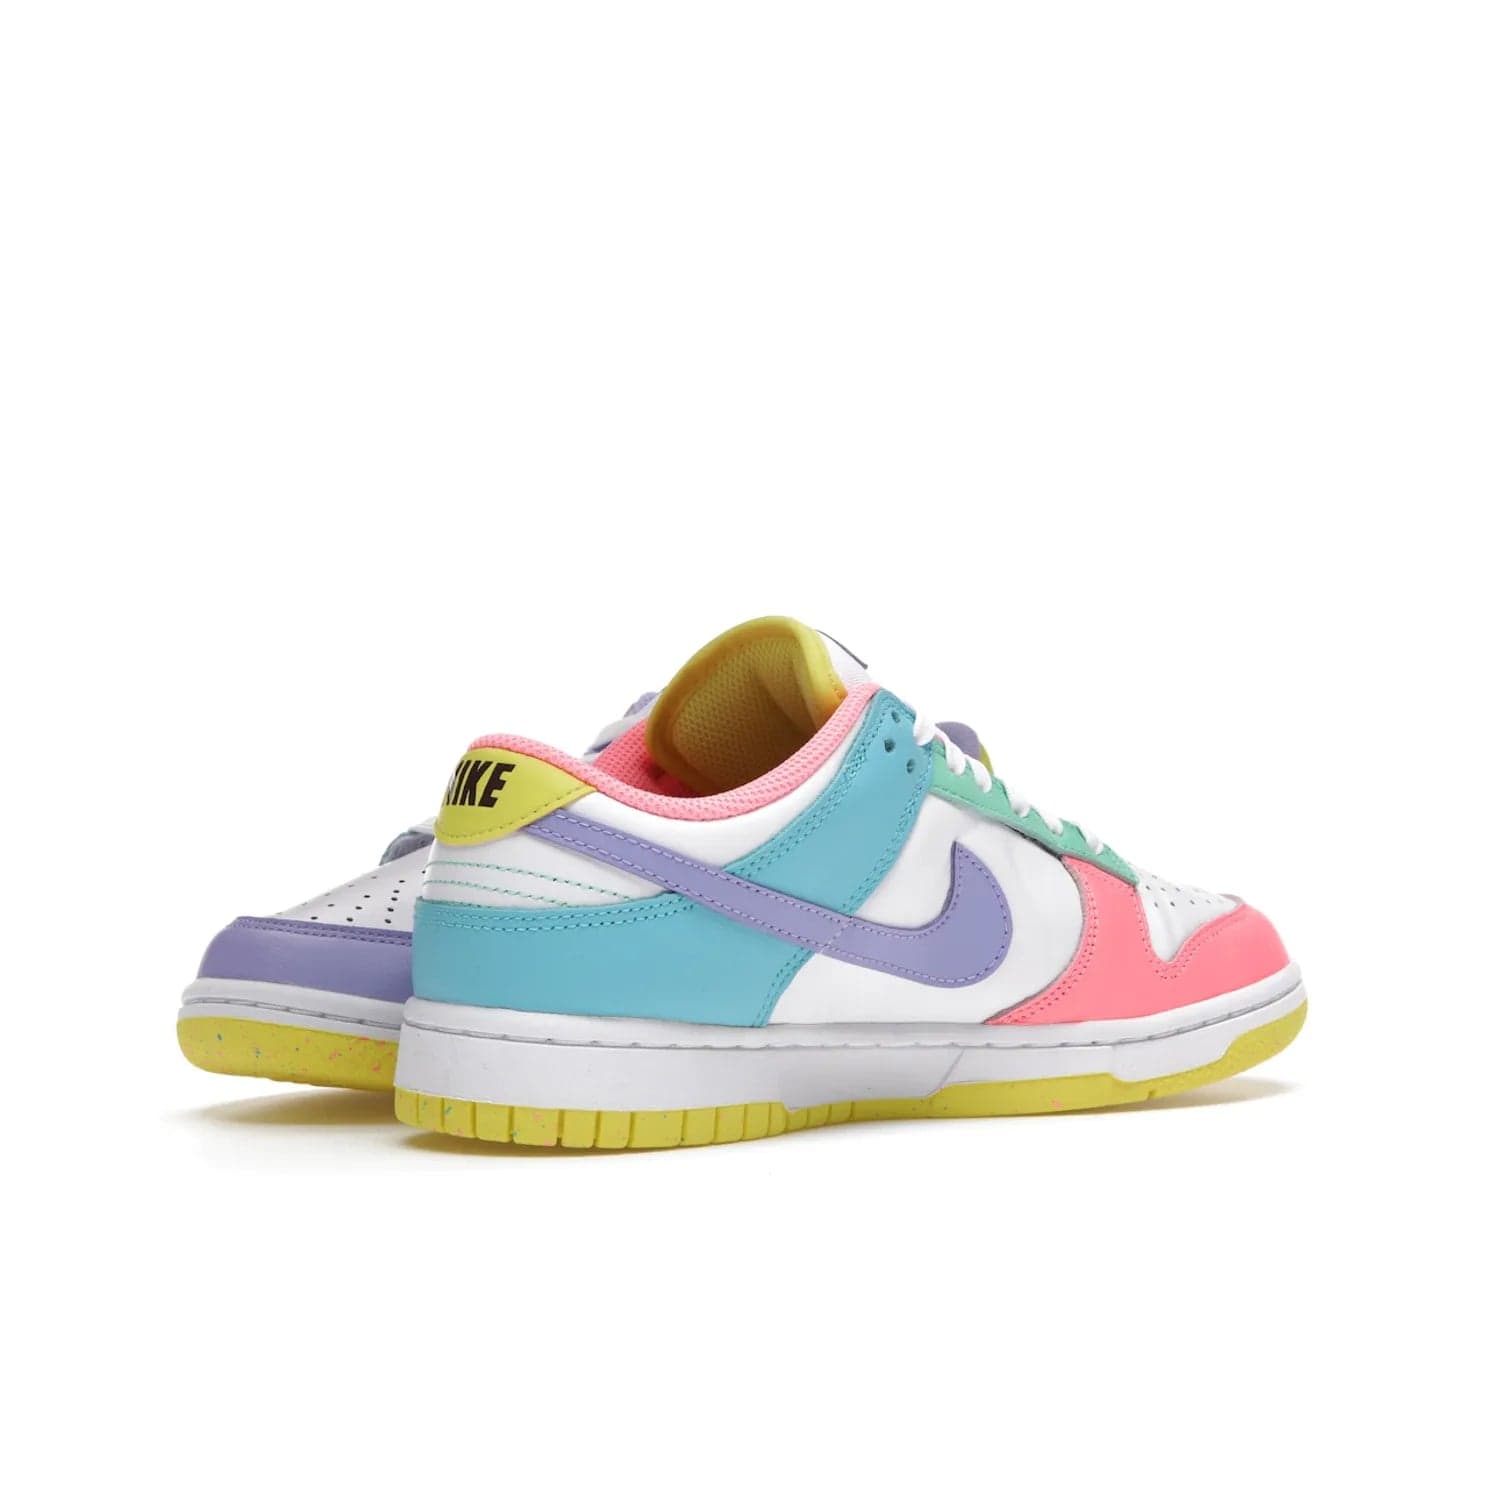 Nike Dunk Low SE Easter Candy (Women's) - Image 15 - Only at www.BallersClubKickz.com - UP
The Nike Dunk Low SE Easter Candy (Women's) brings a stylish touch to any outfit with its white leather upper, colorful accents, and multicolor speckle detailing. Shop now before they're gone.